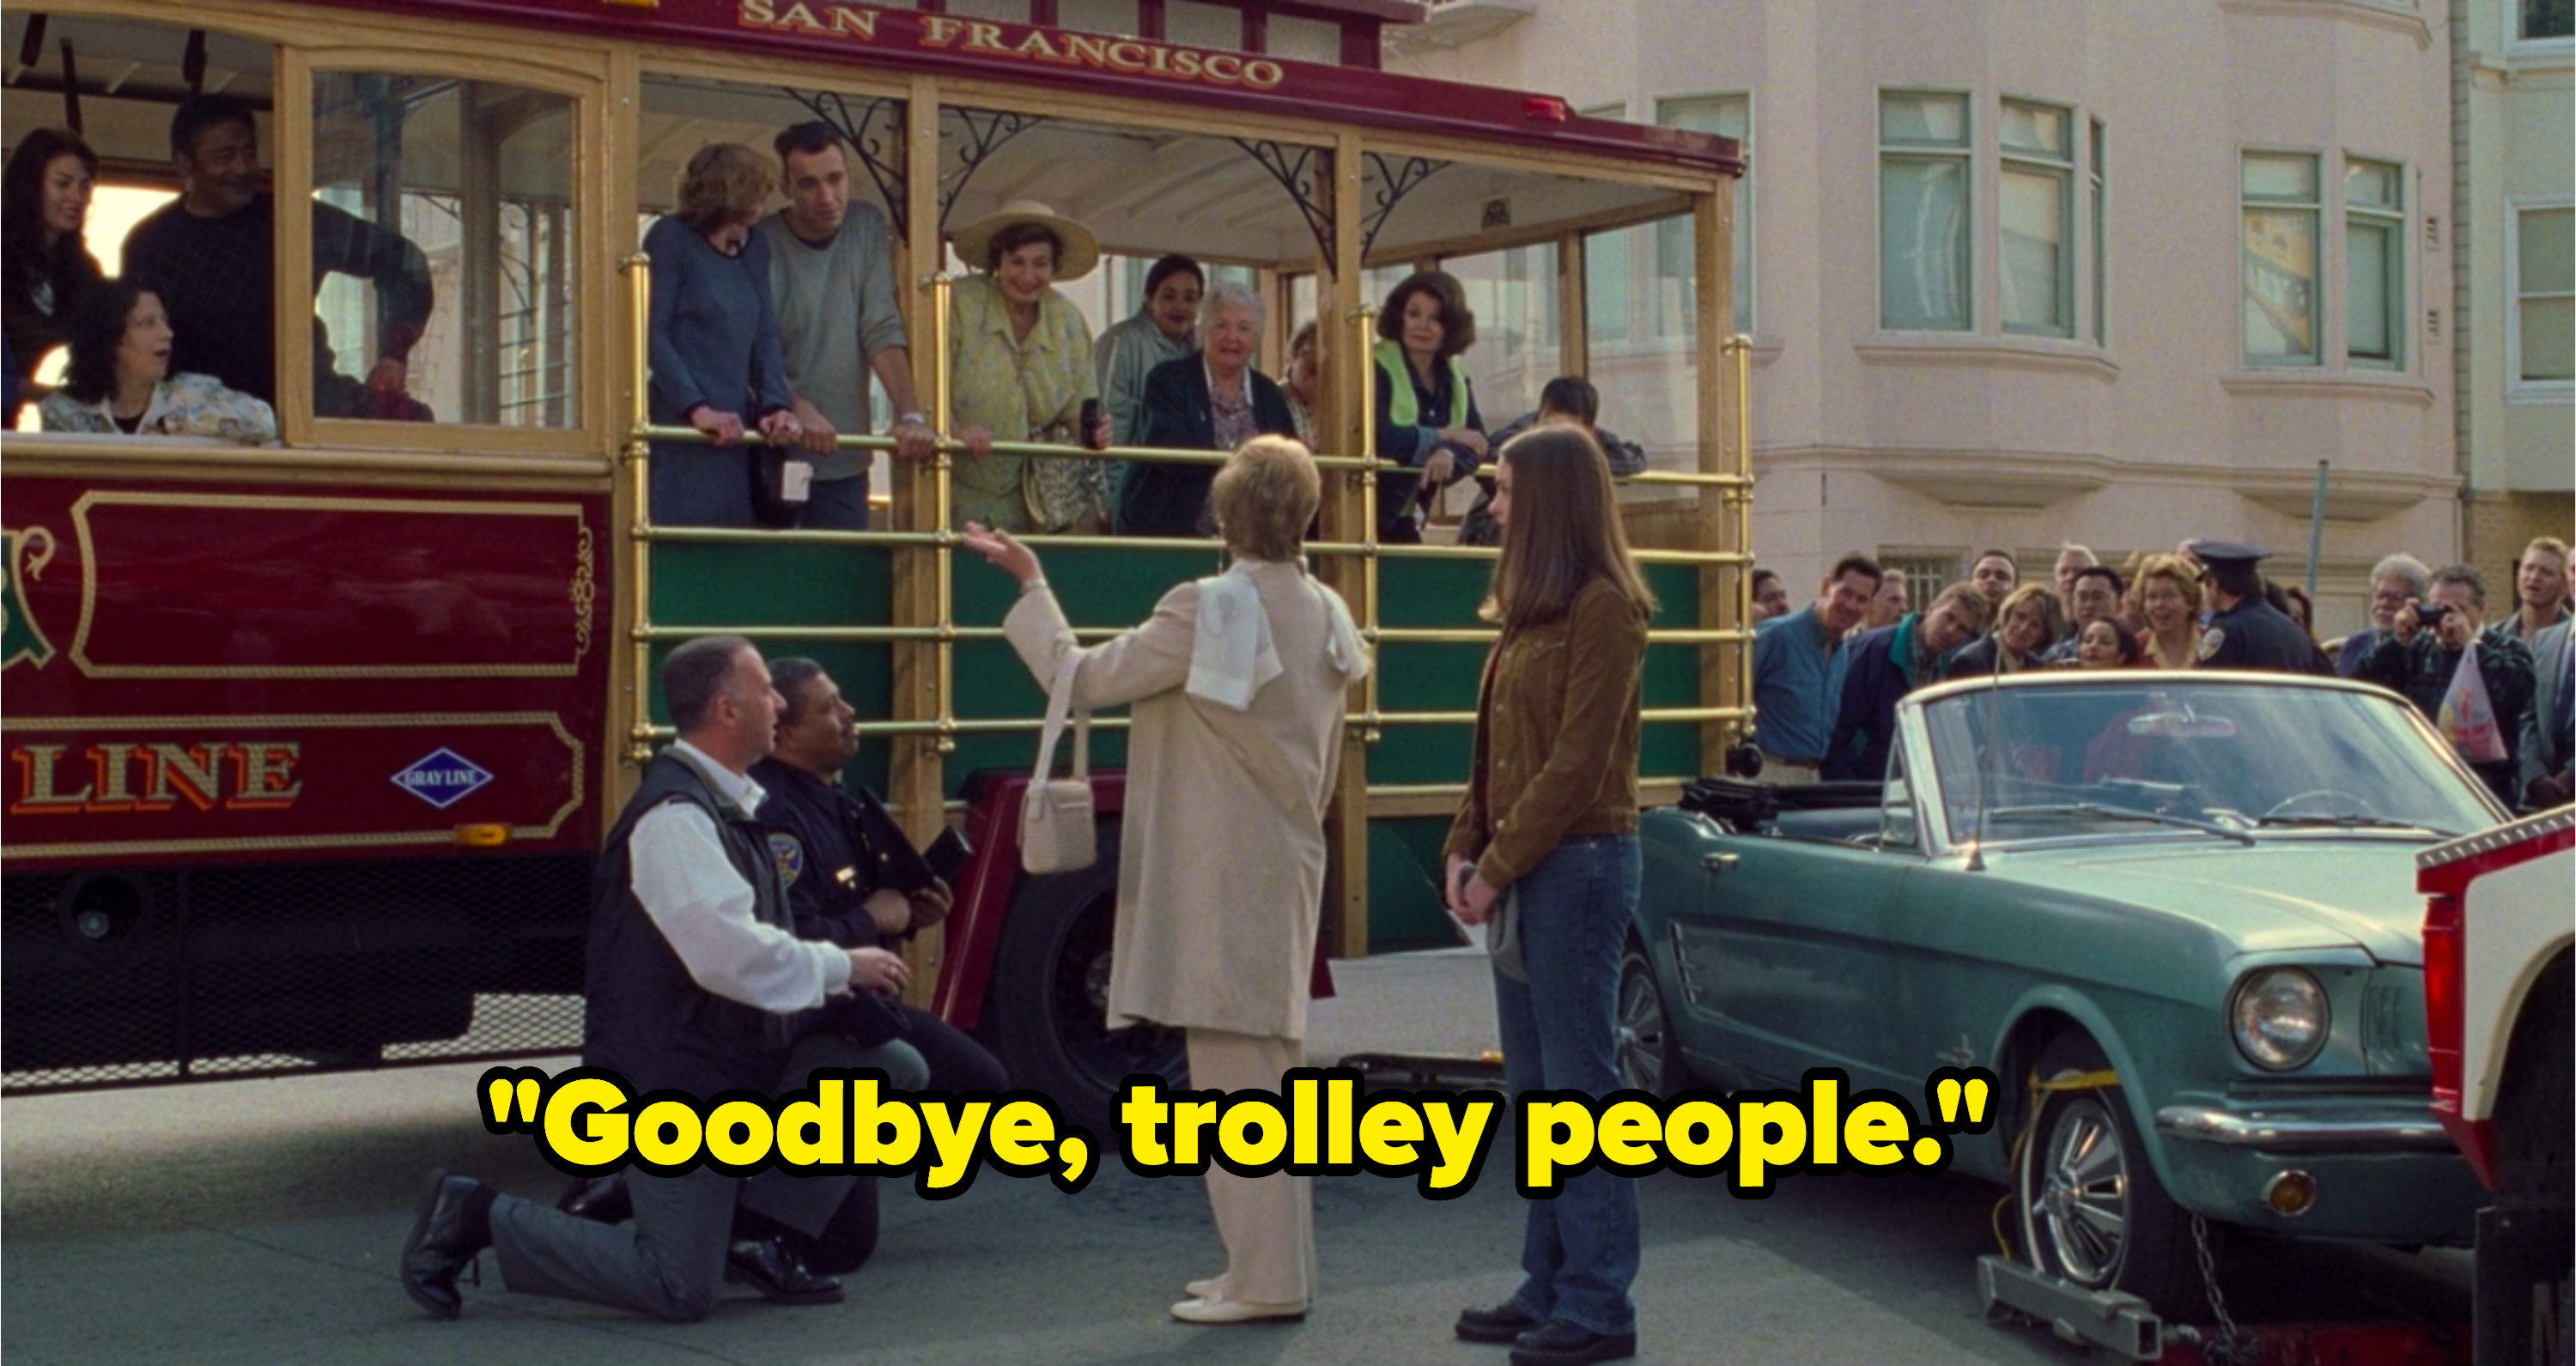 Clarisse says &quot;Goodbye, trolley people&quot;